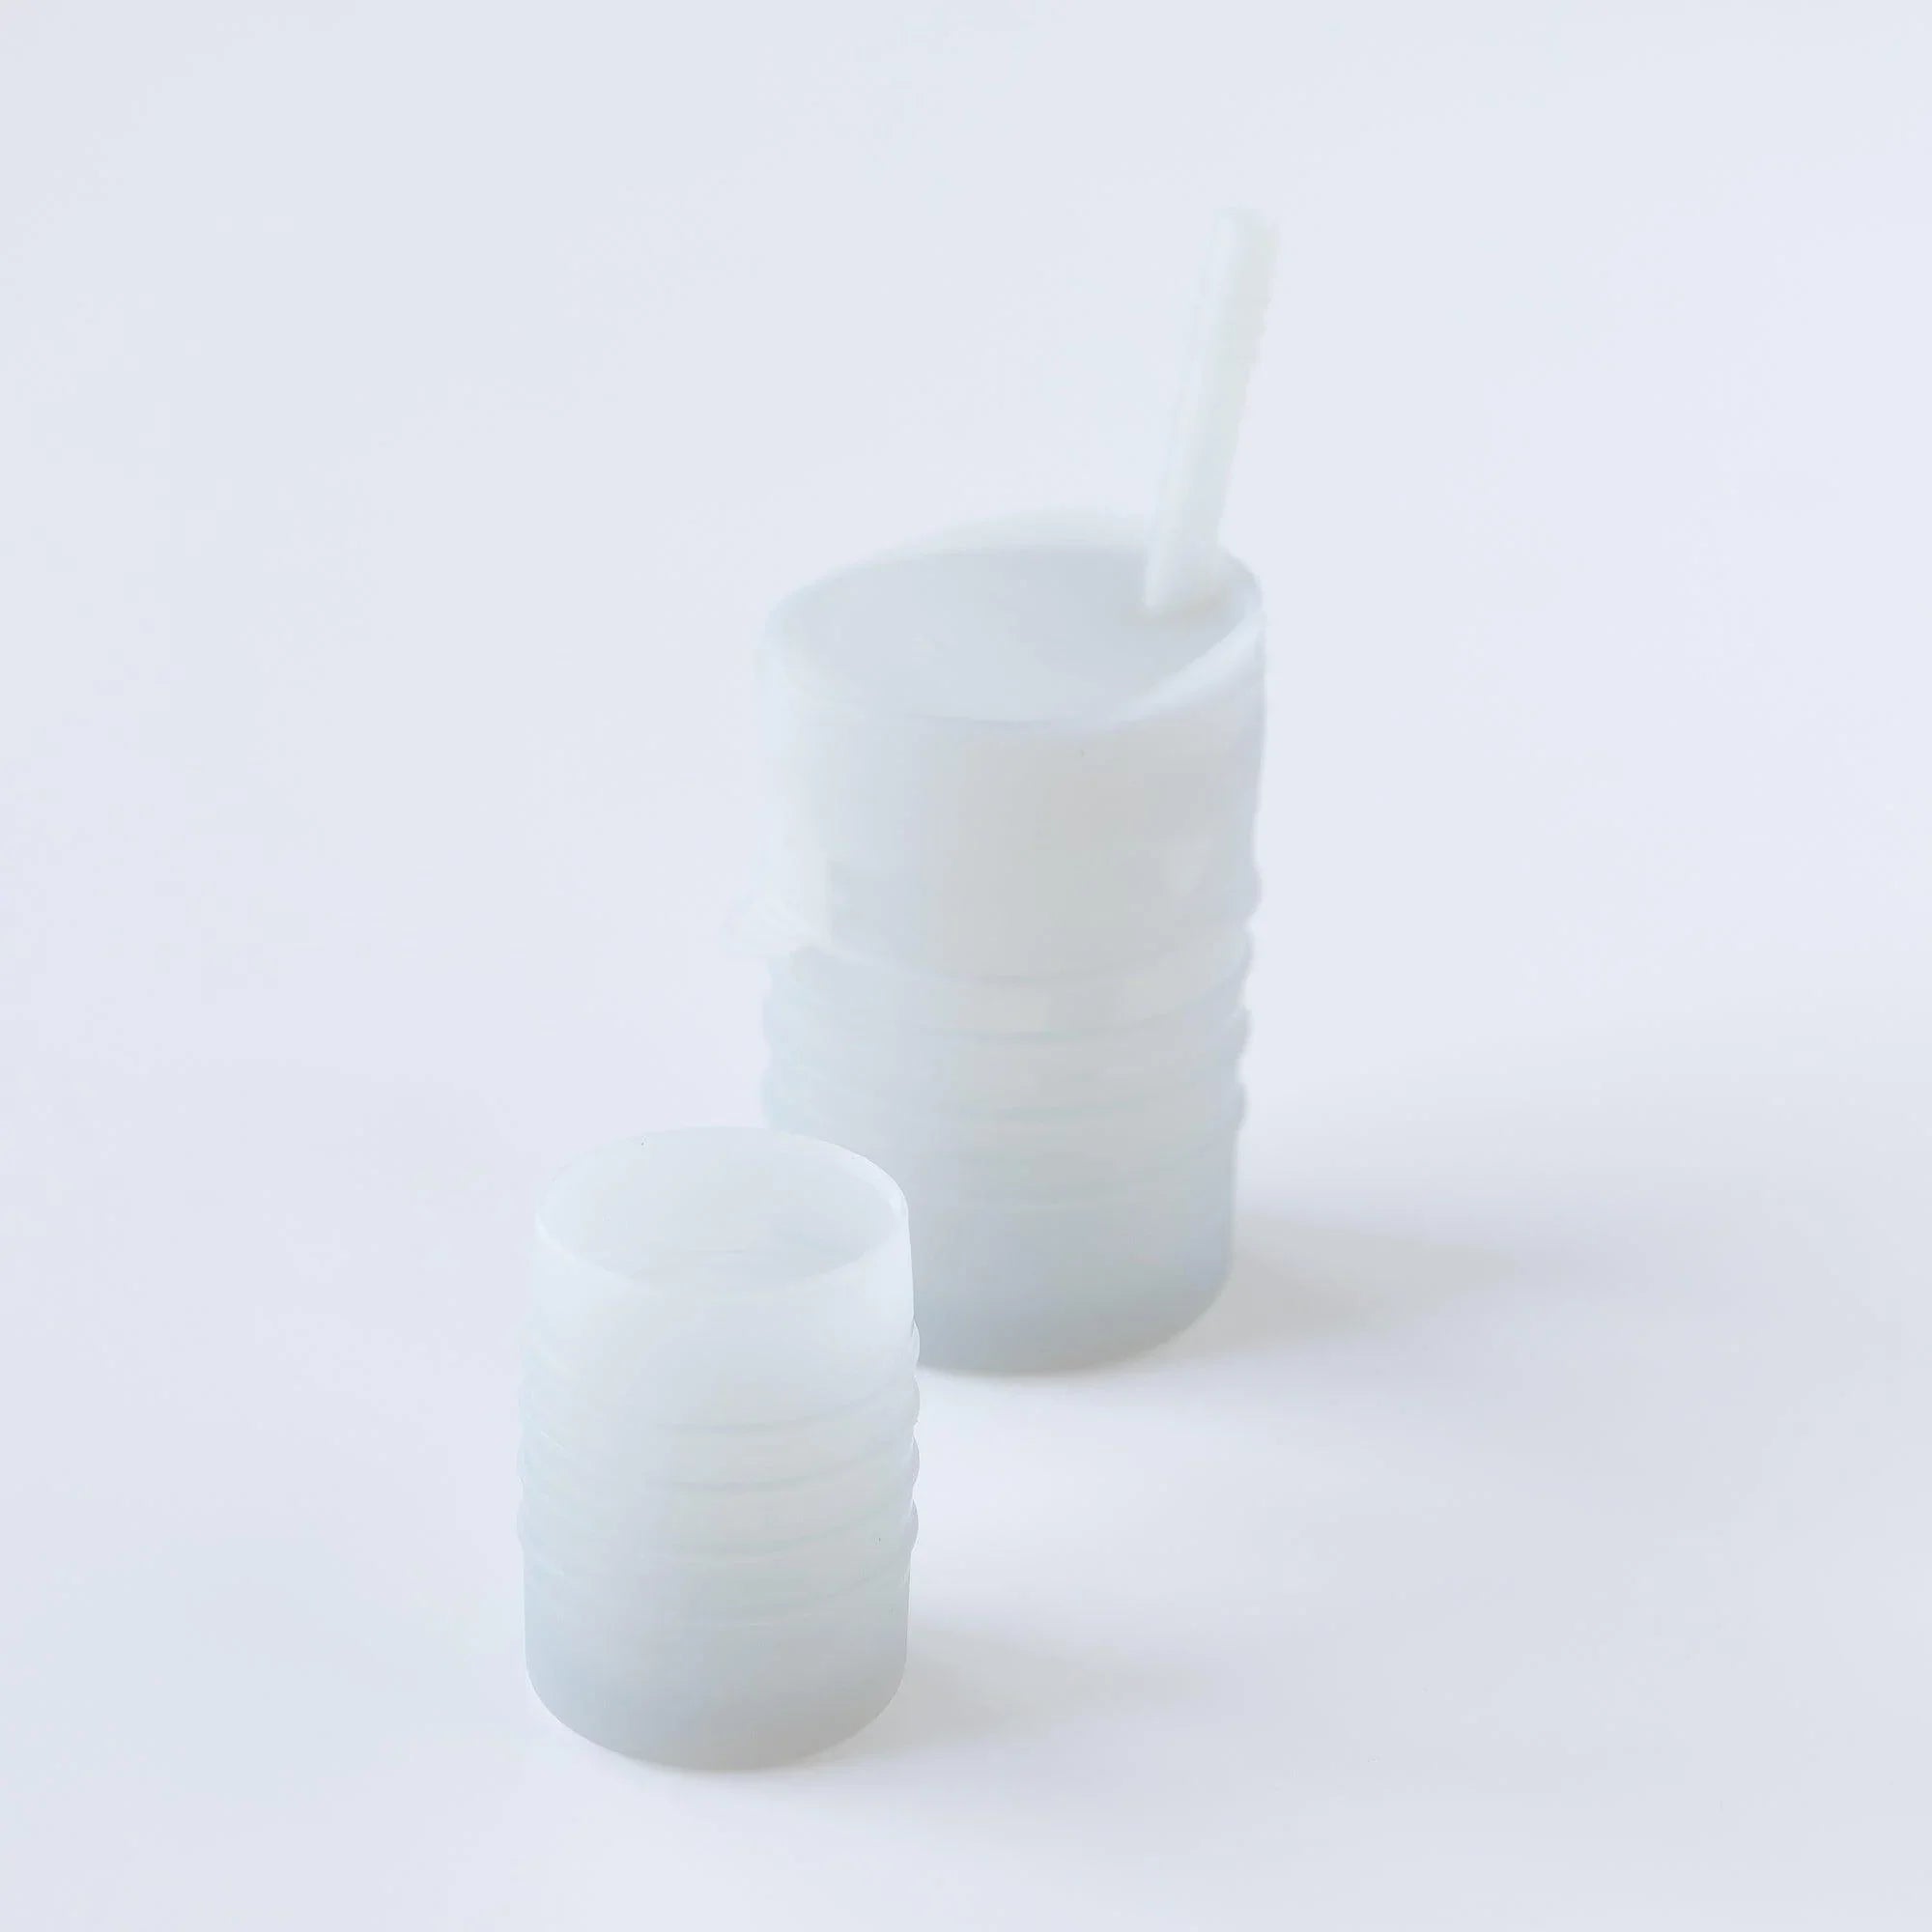 Silicone Starter Cup: Gray - Bumkins